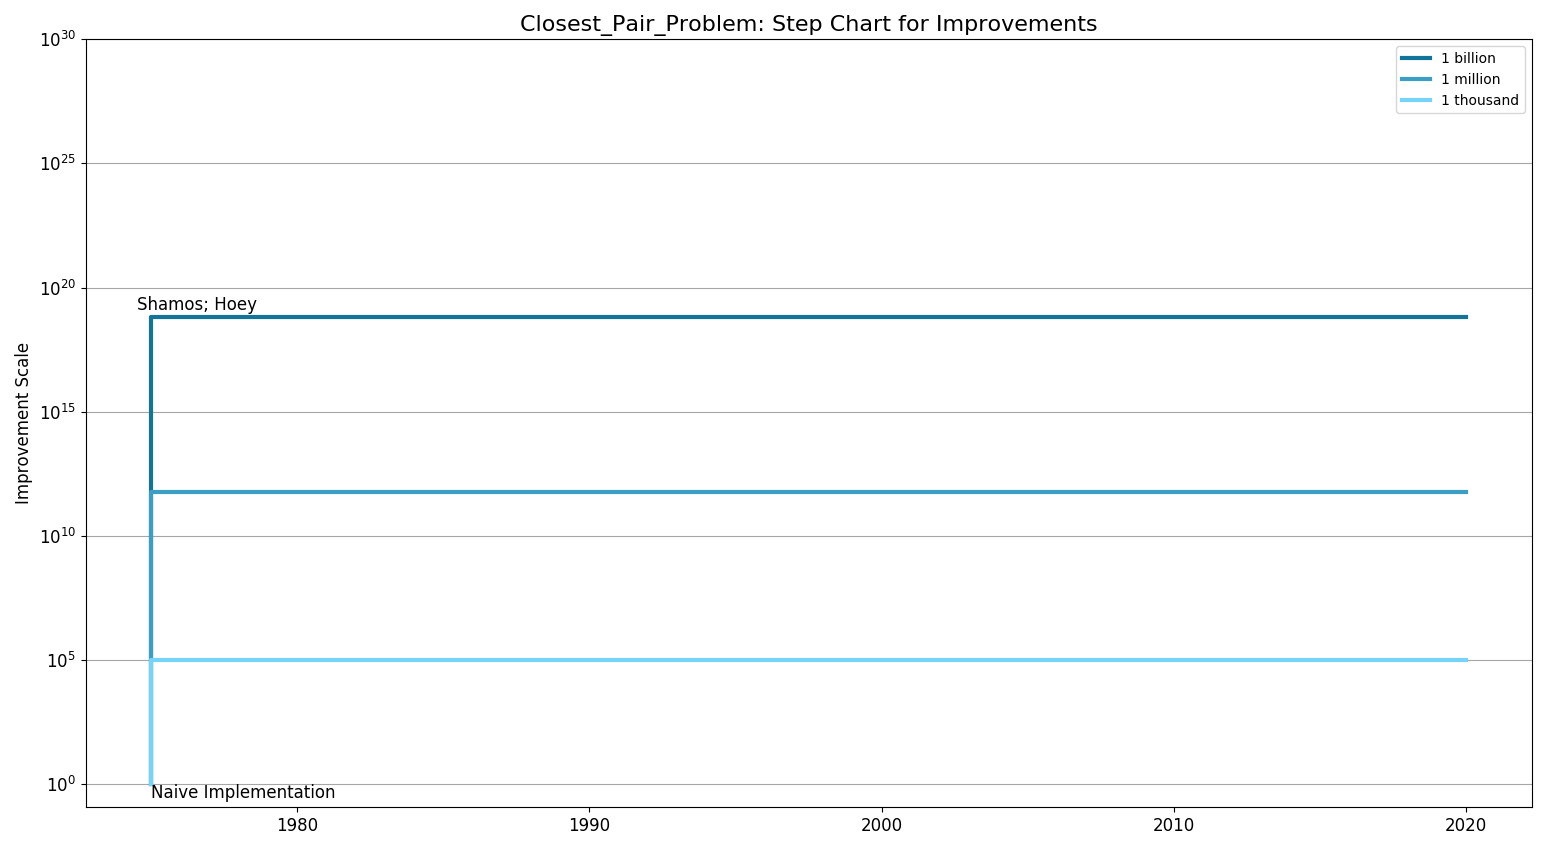 File:Closest Pair ProblemStepChart.png